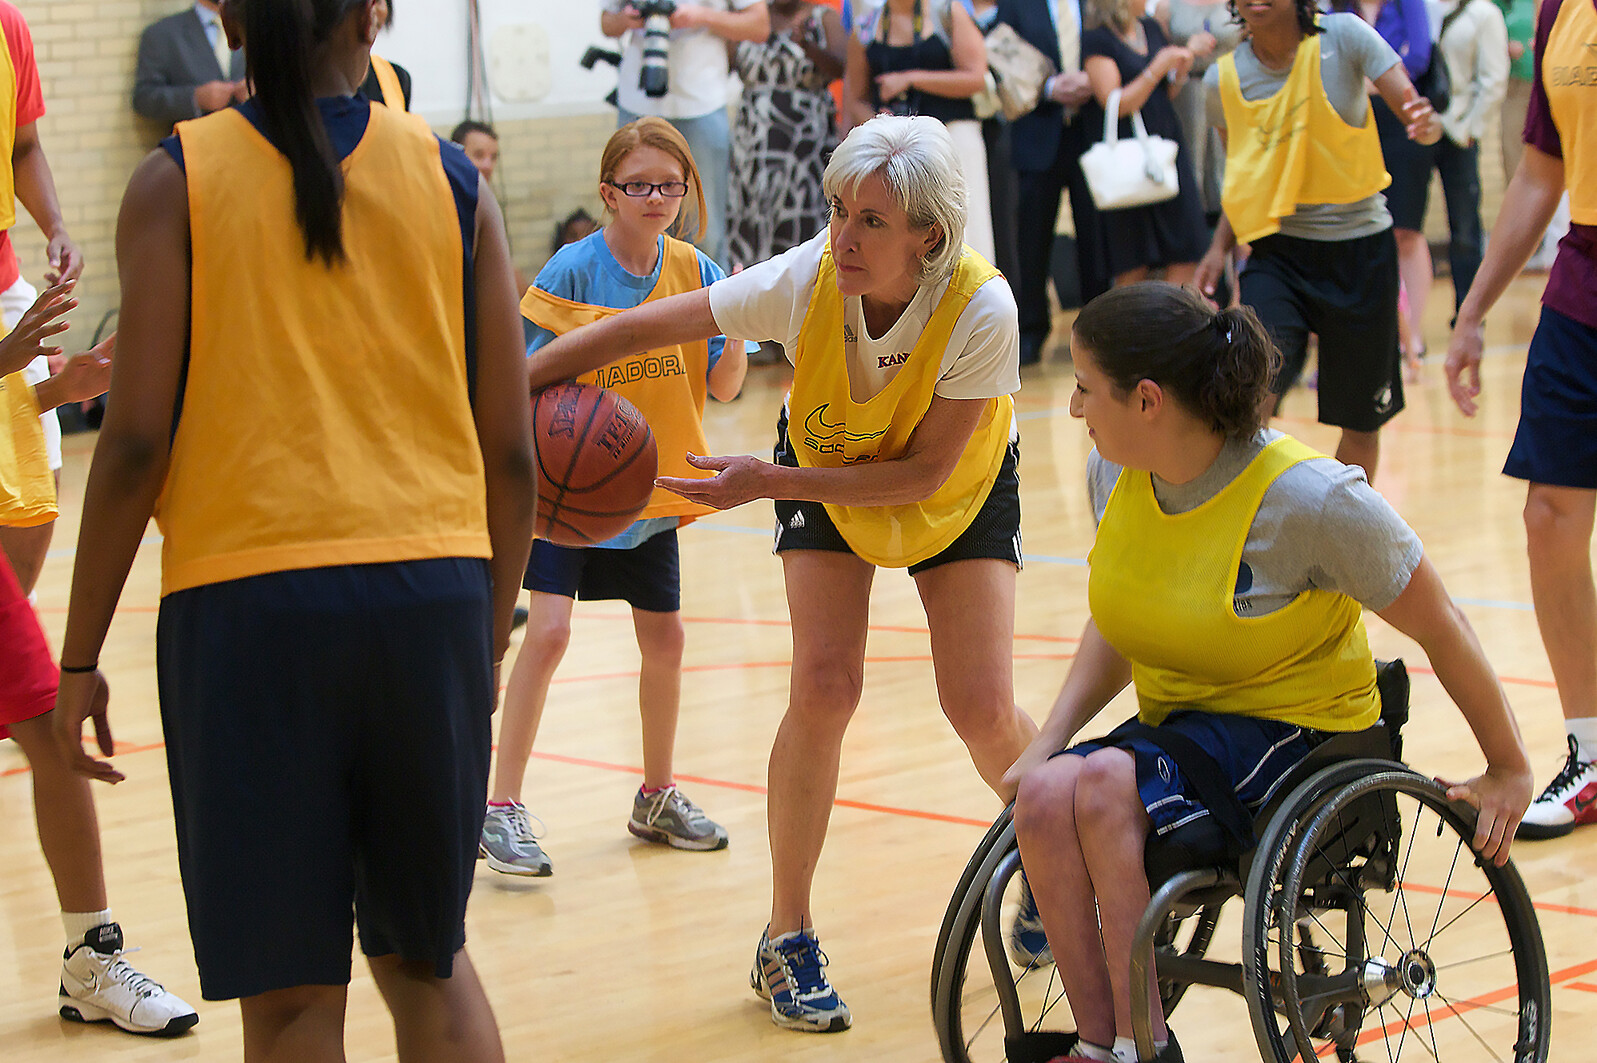 basketball game with players of various abilities